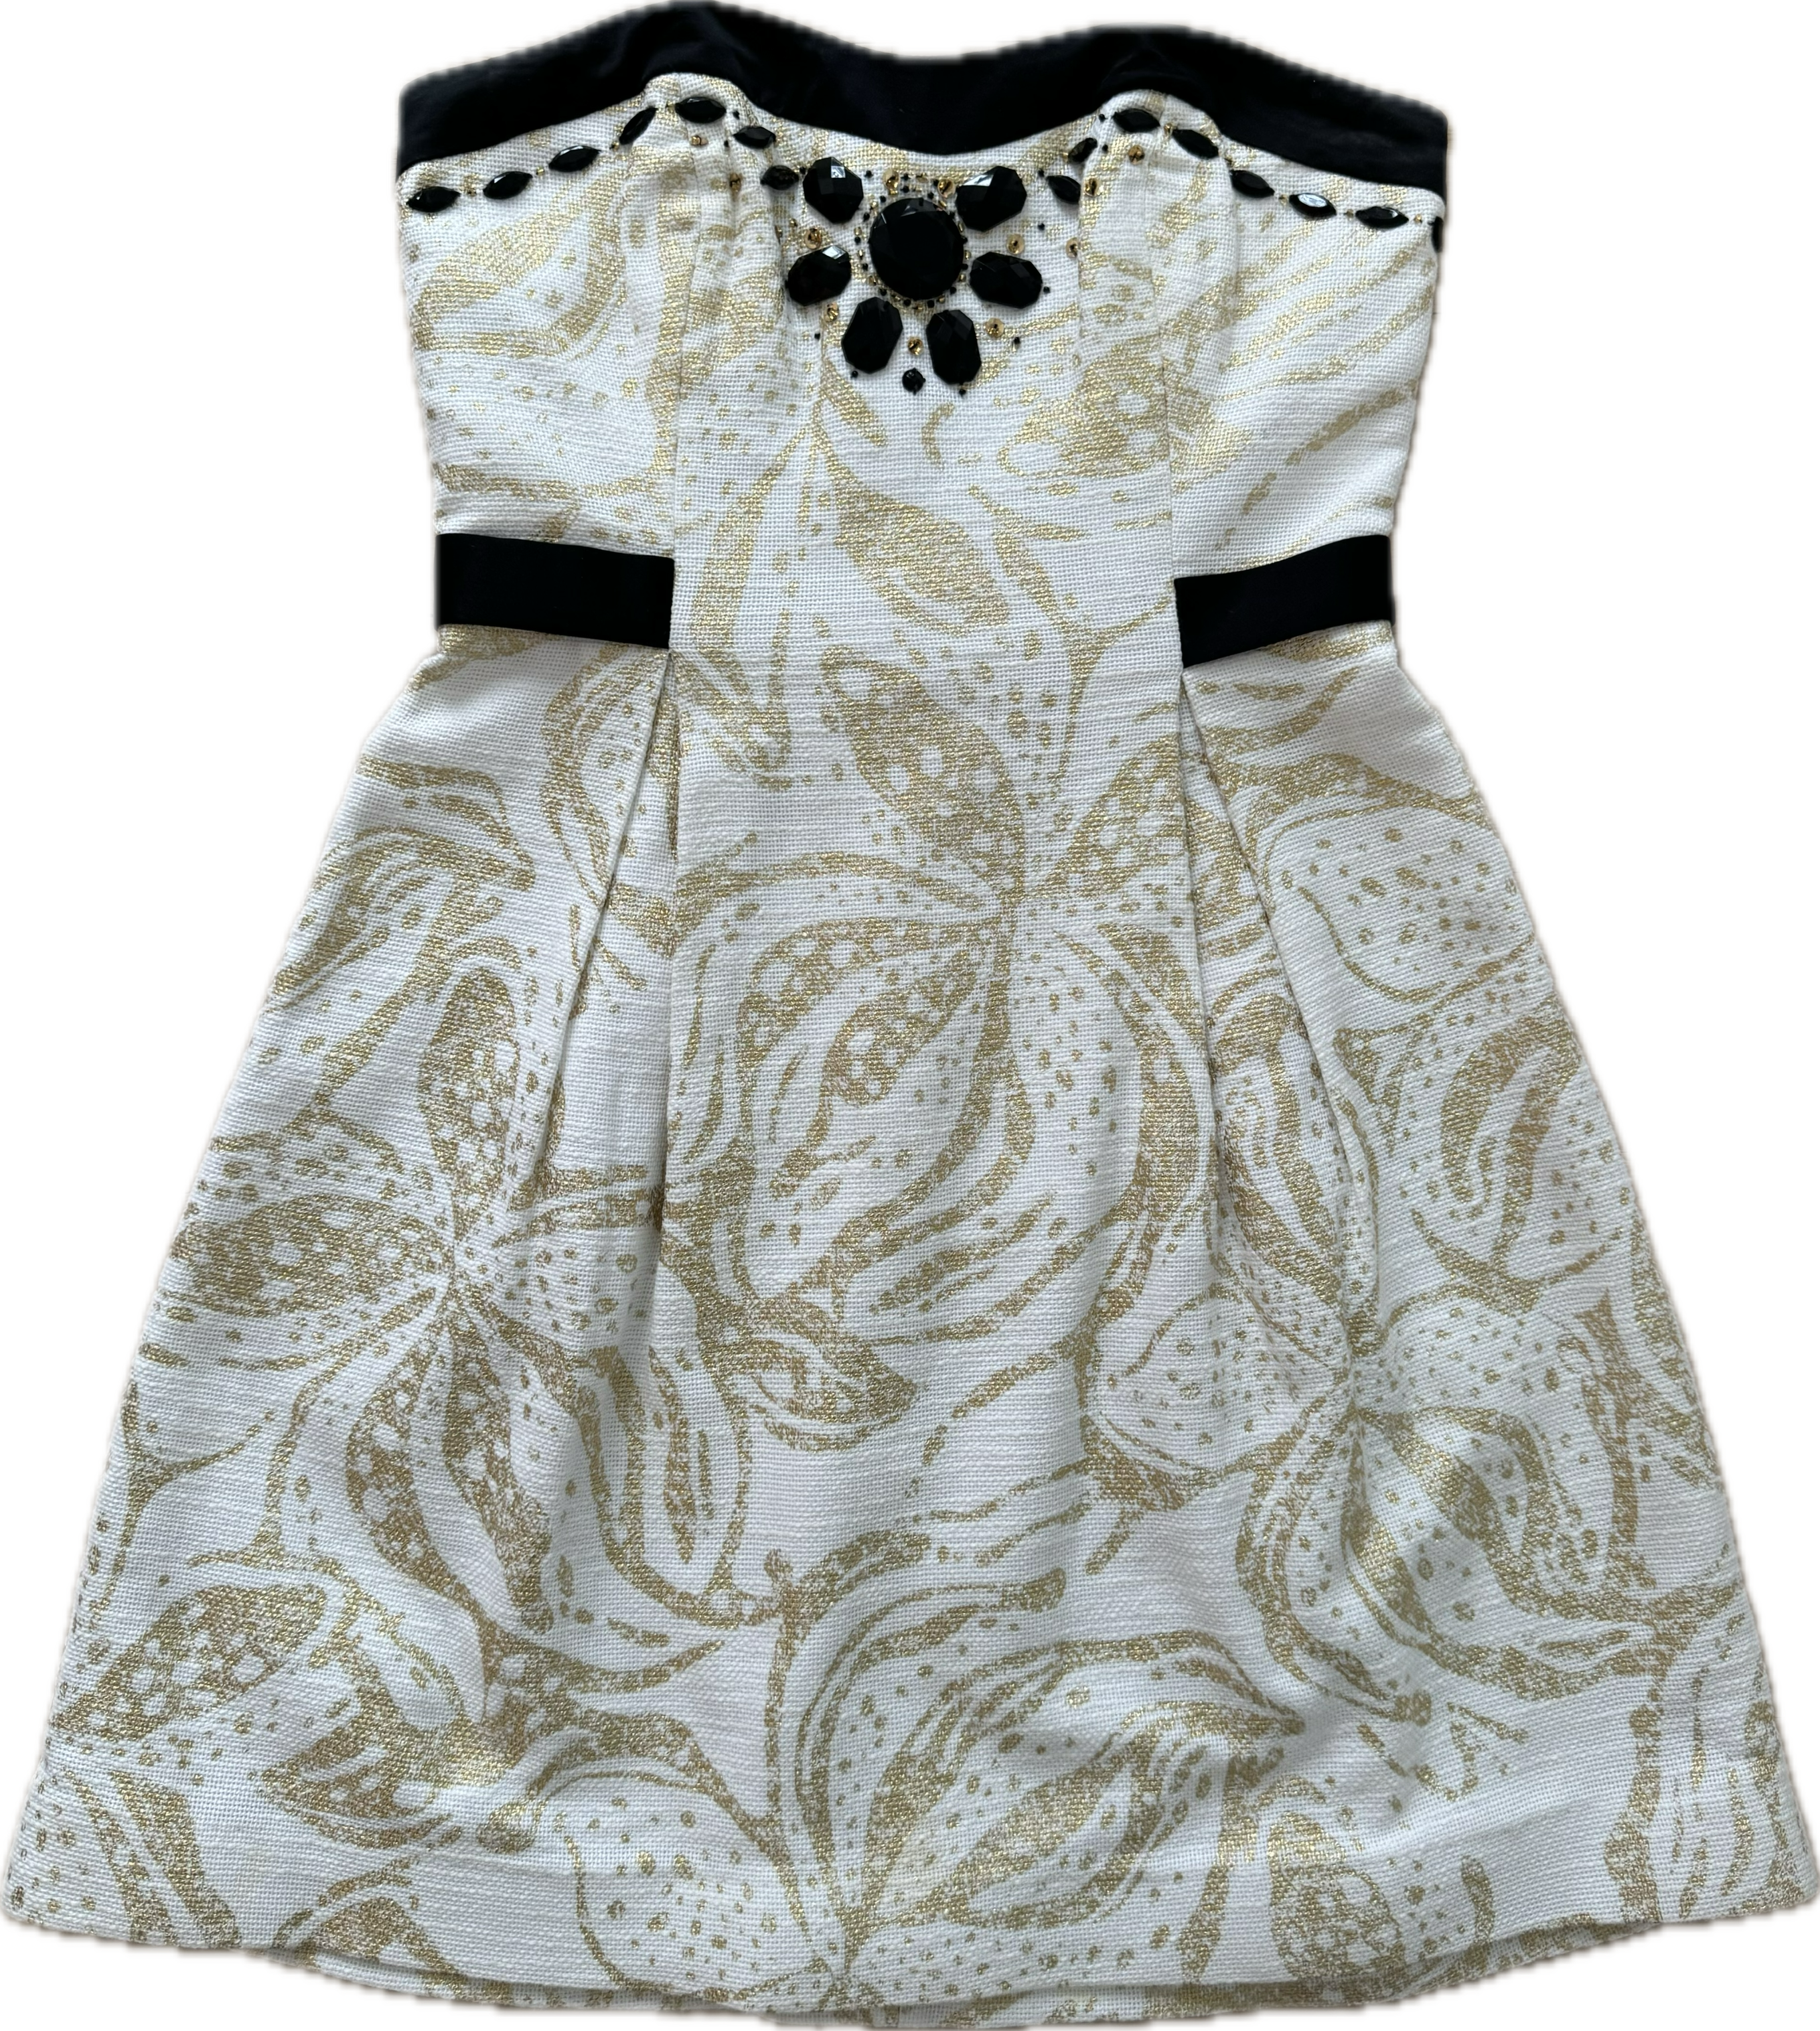 Lilly Pulitzer Strapless Dress, Cream/Gold/Black Womens Size 2